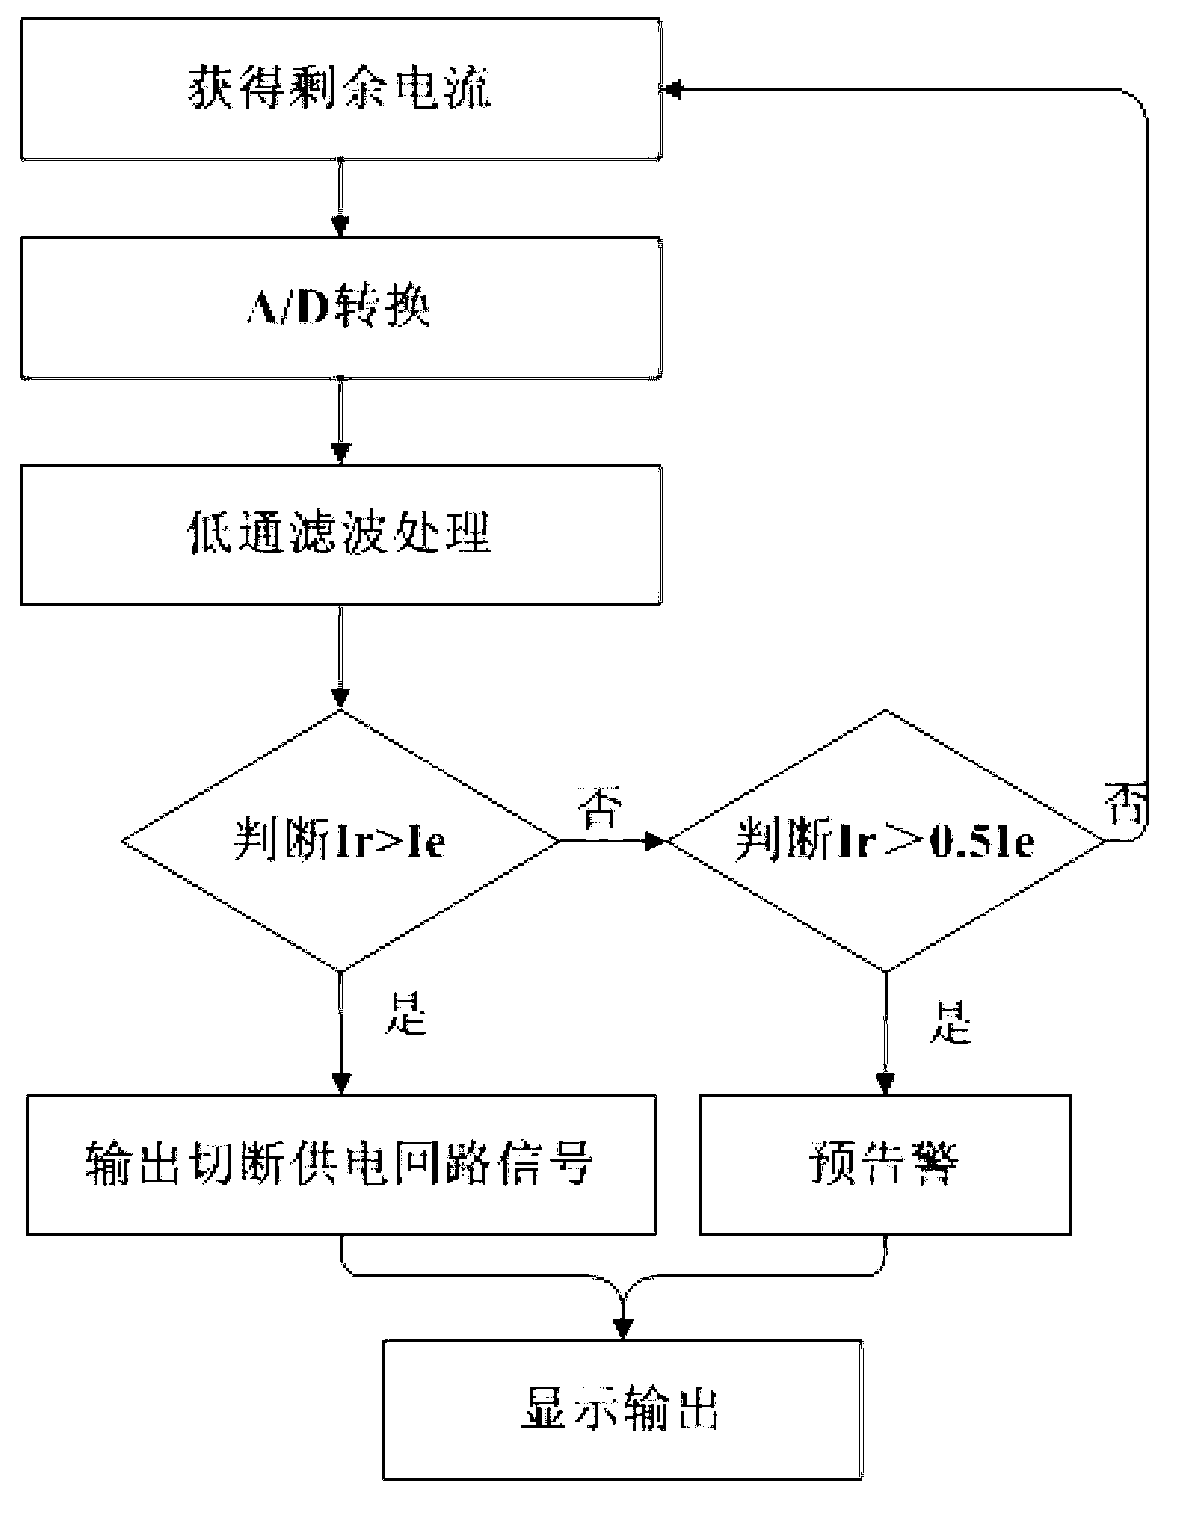 Offshore power grid power distribution terminal energy source monitoring device and monitoring method